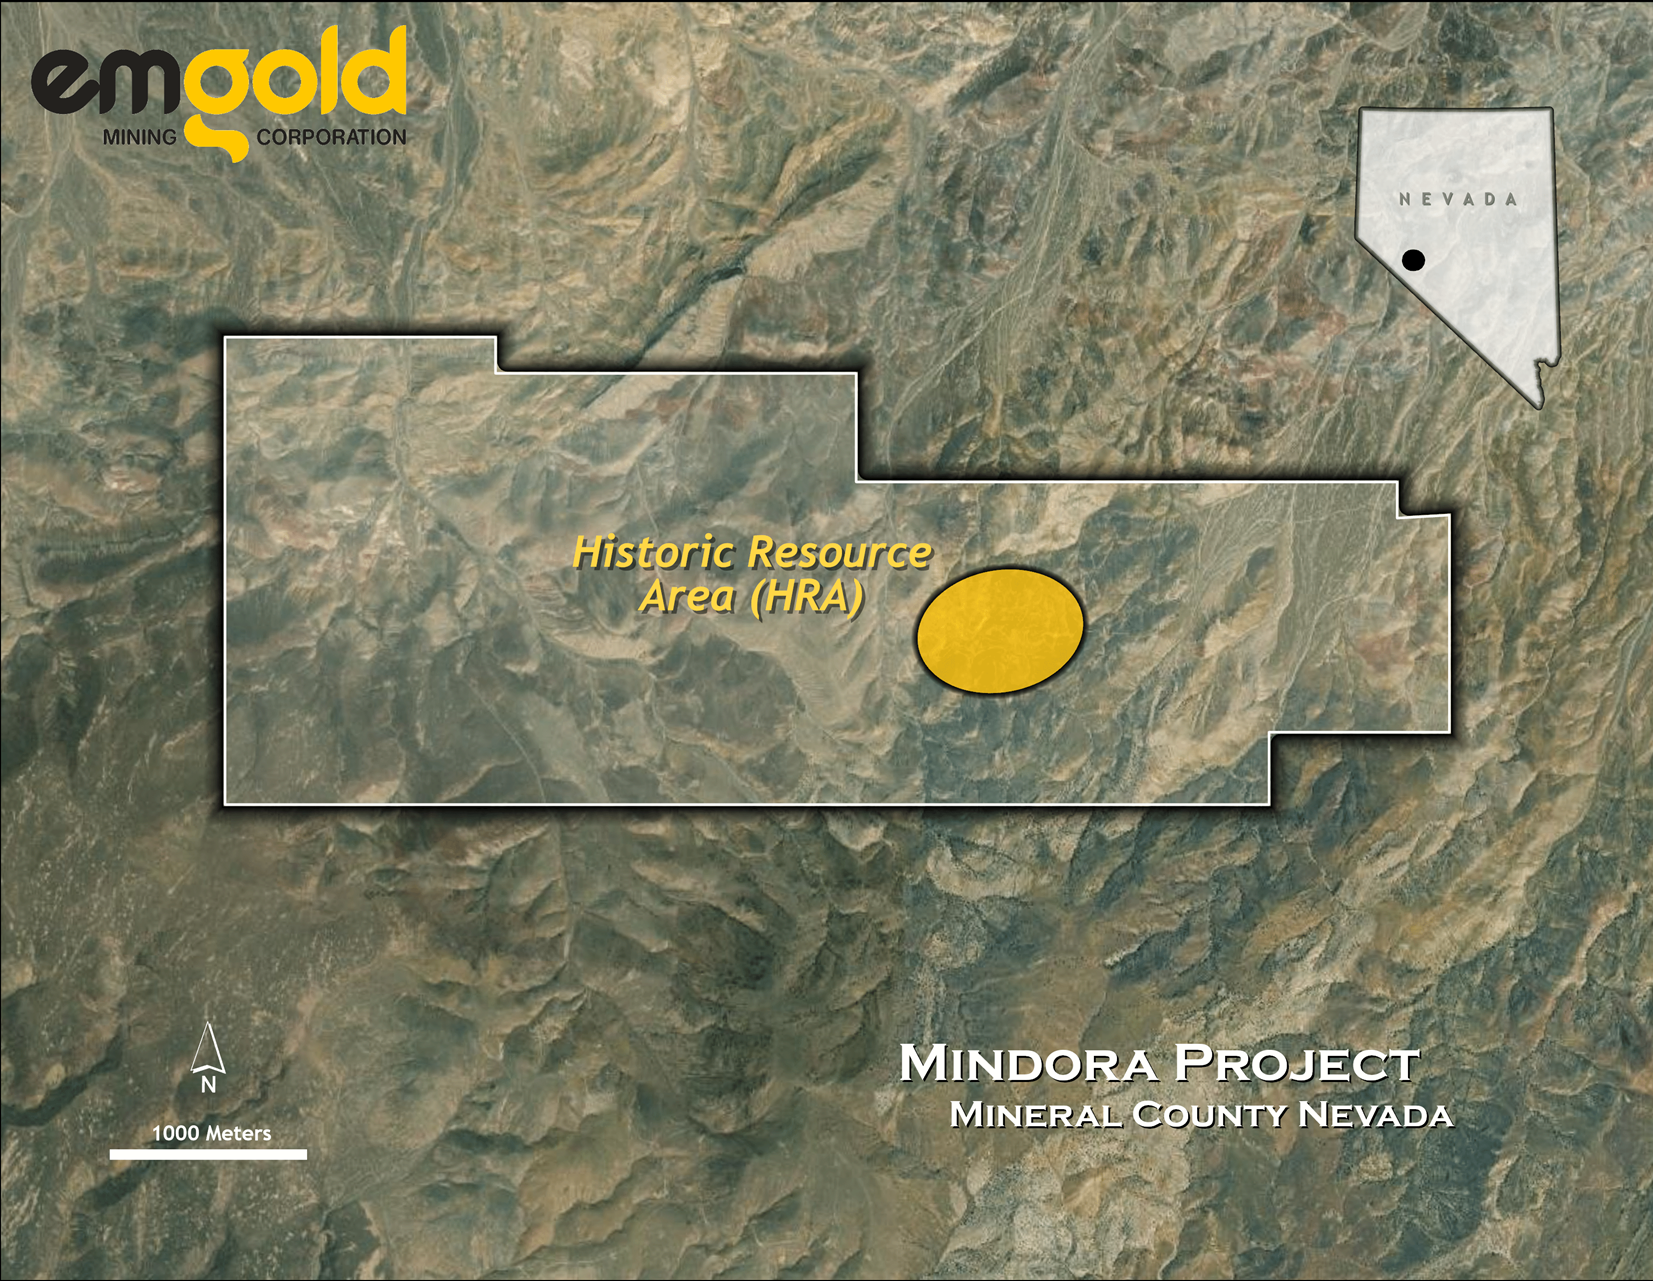 Emgold Mining Corporation, Wednesday, January 19, 2022, Press release picture